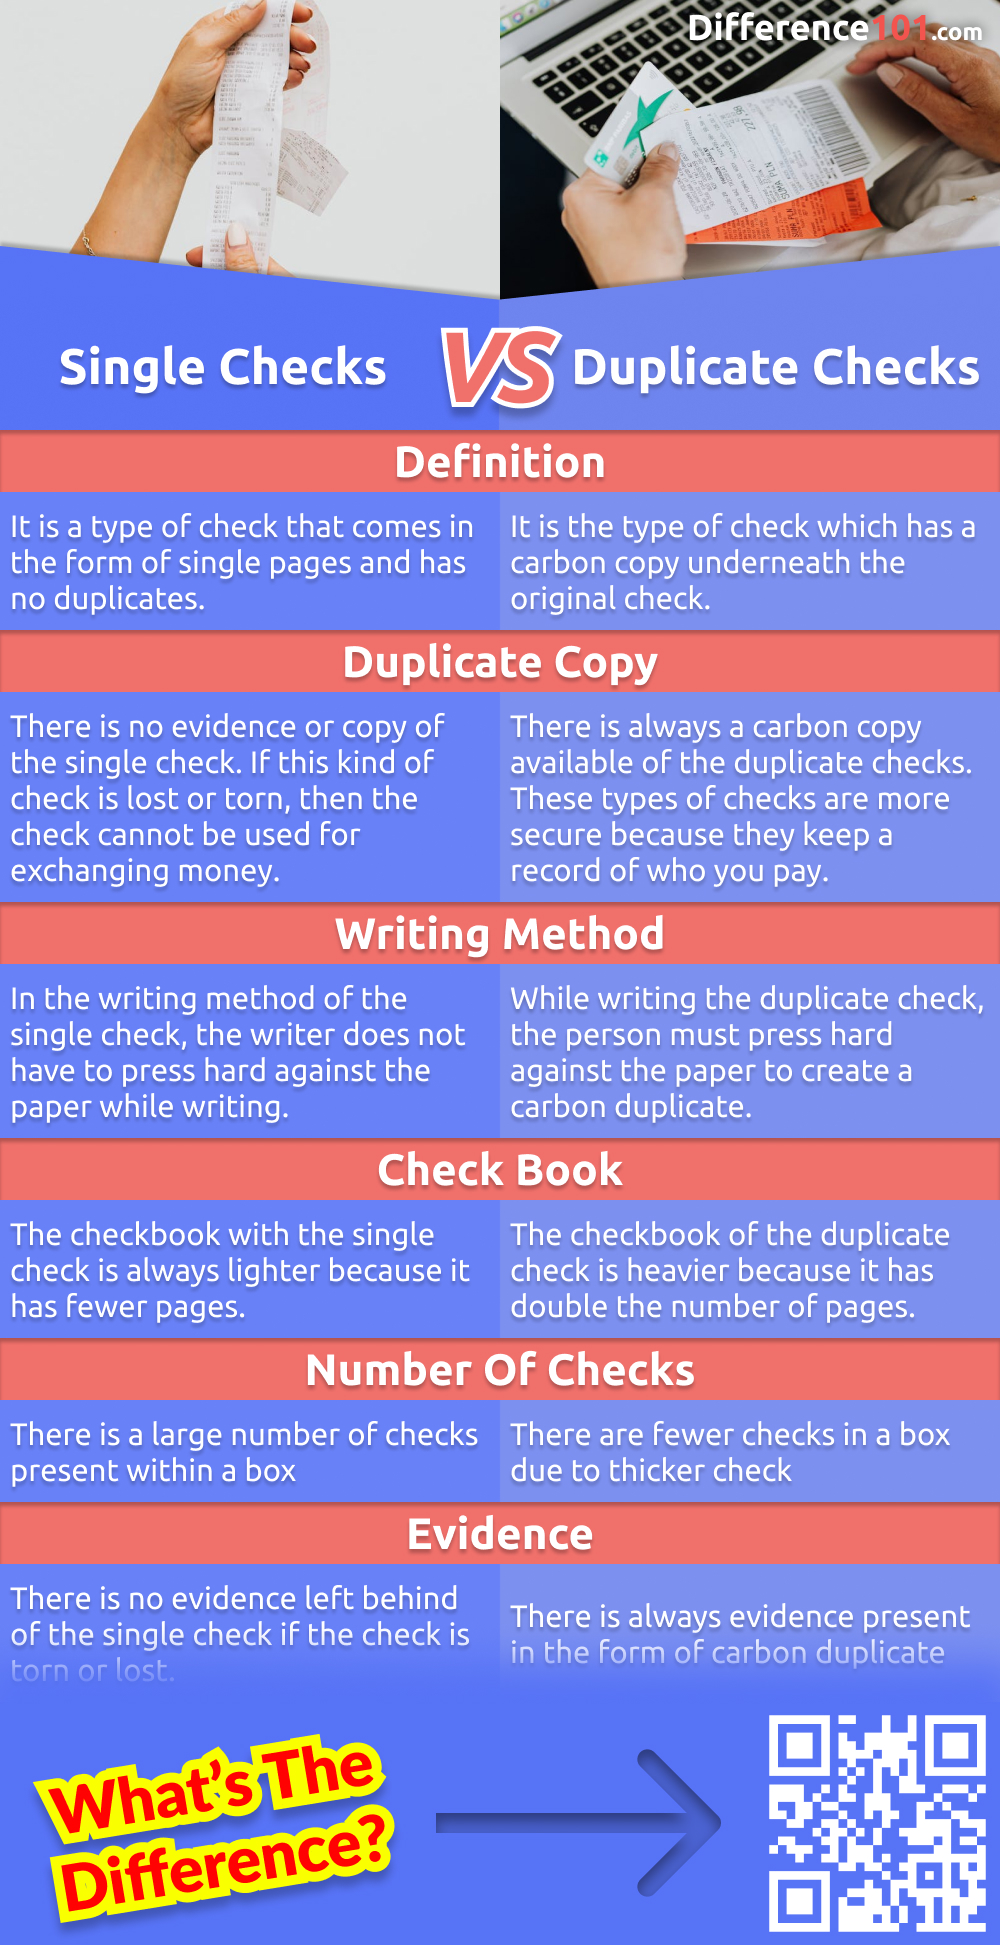 Trying to decide between single and duplicate checks? This article will help you understand the pros and cons of each, their key differences and when you should use each one.